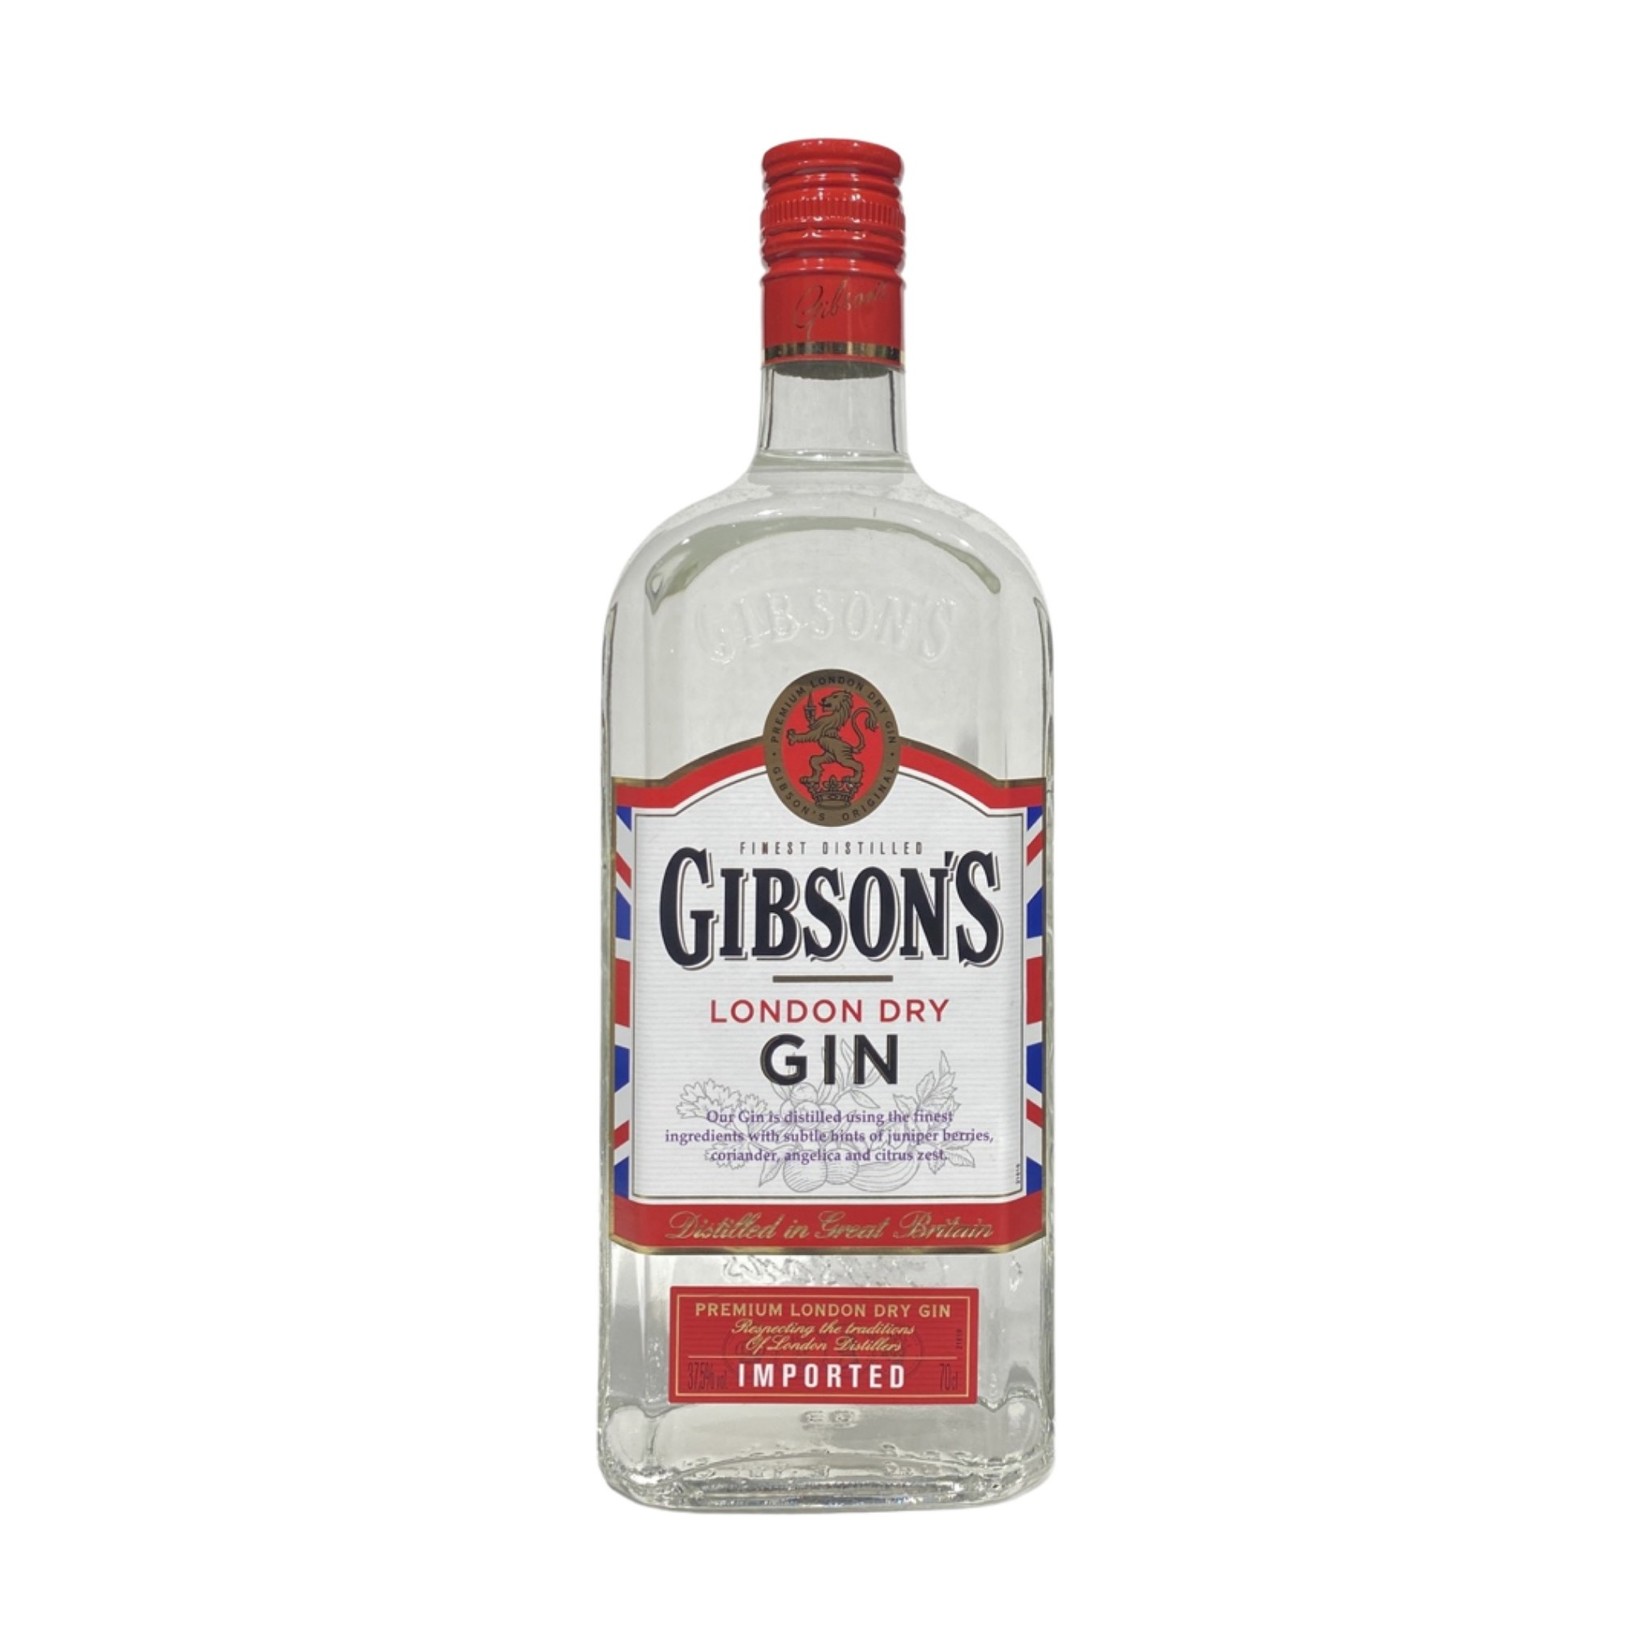 Gibson Londen dry gin